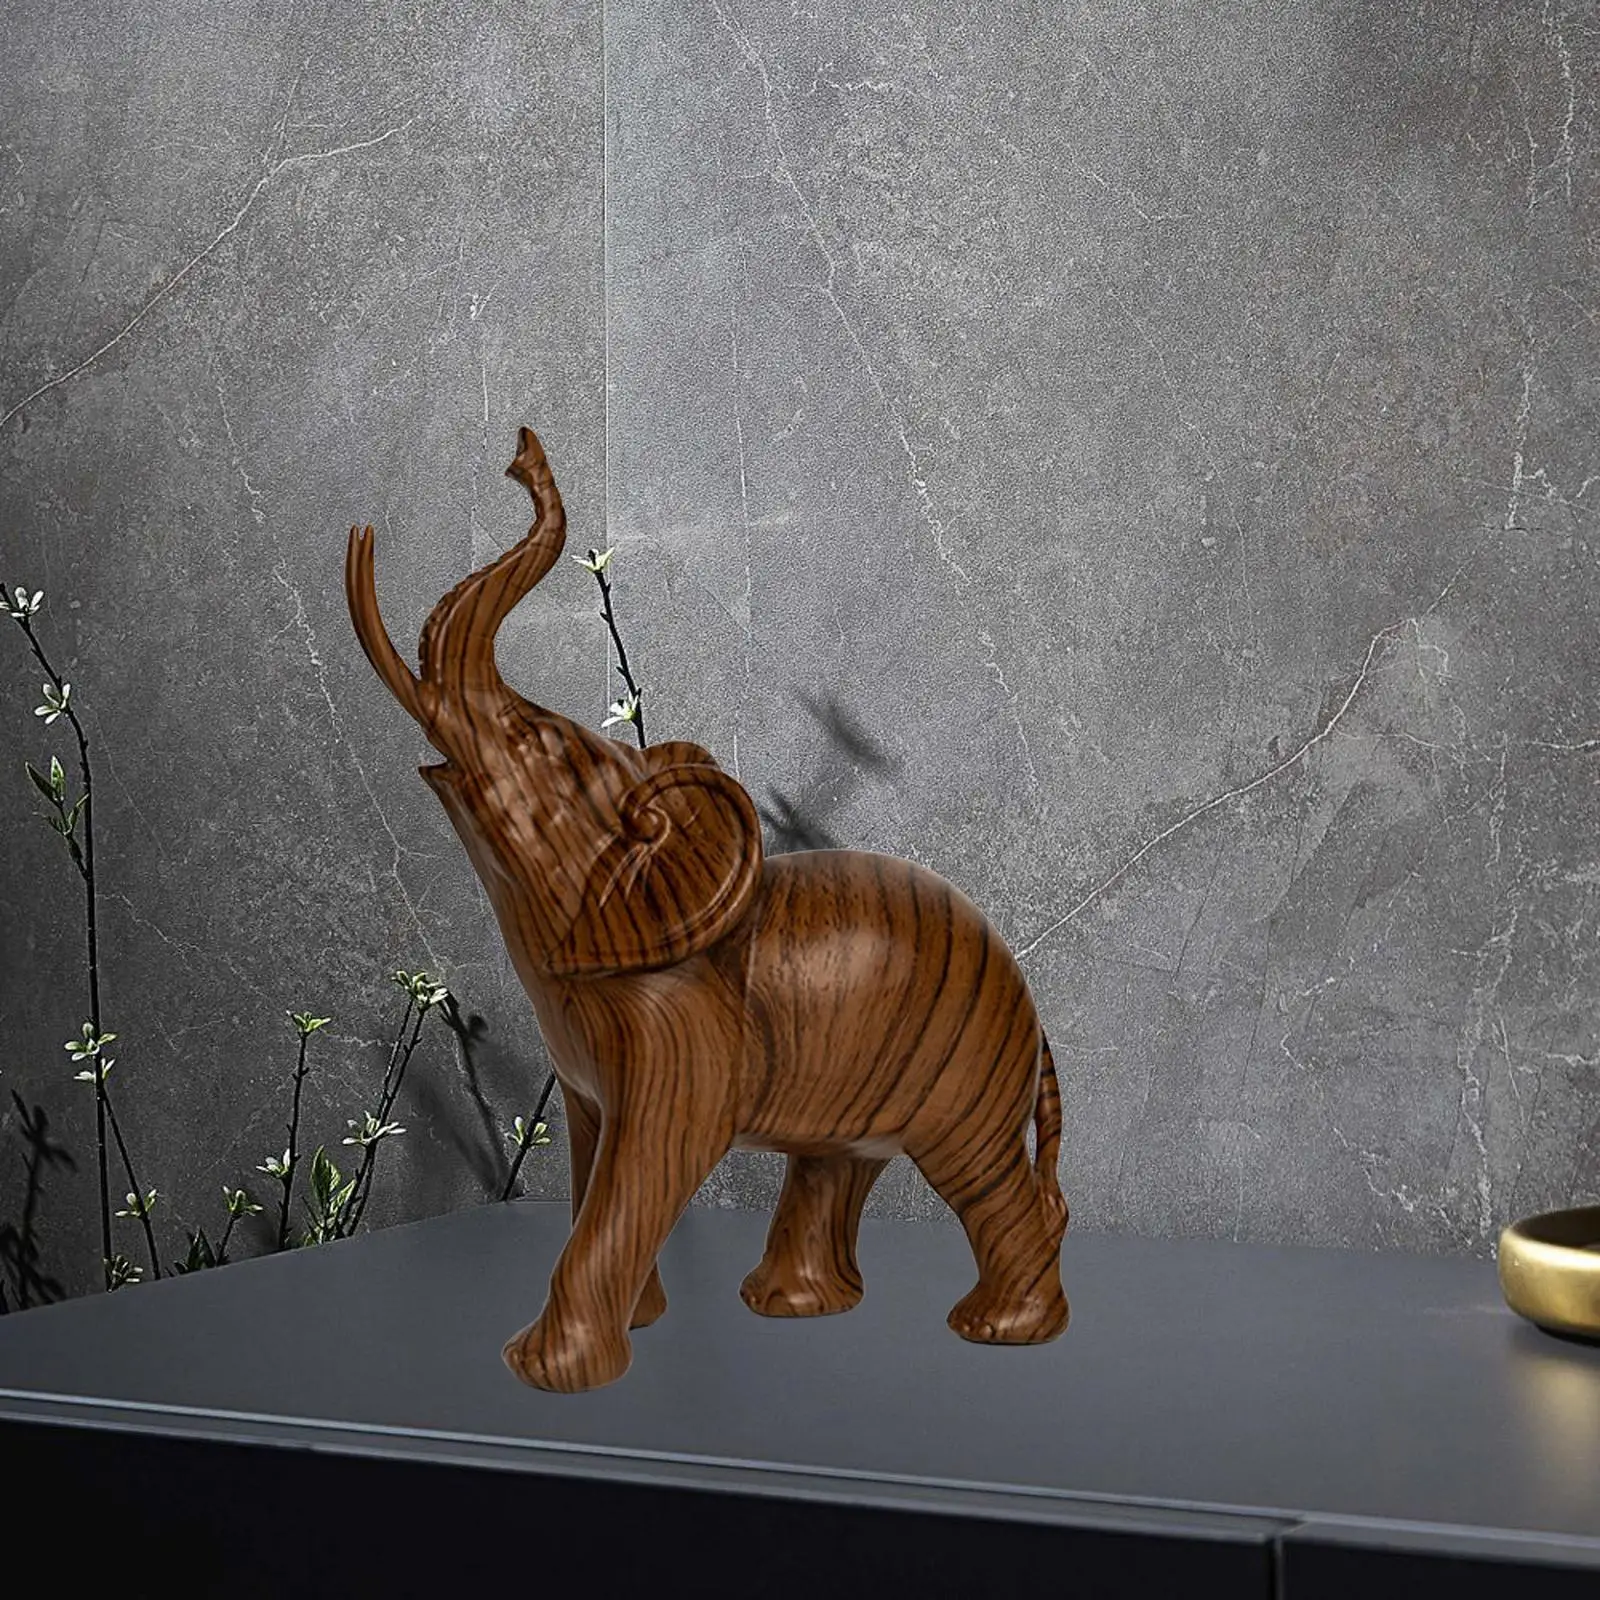 Rustic Elephant Statues Sculptures Ornament Desktop Table Centerpiece Resin Figurines for Sill Office Home Living Room Bedroom